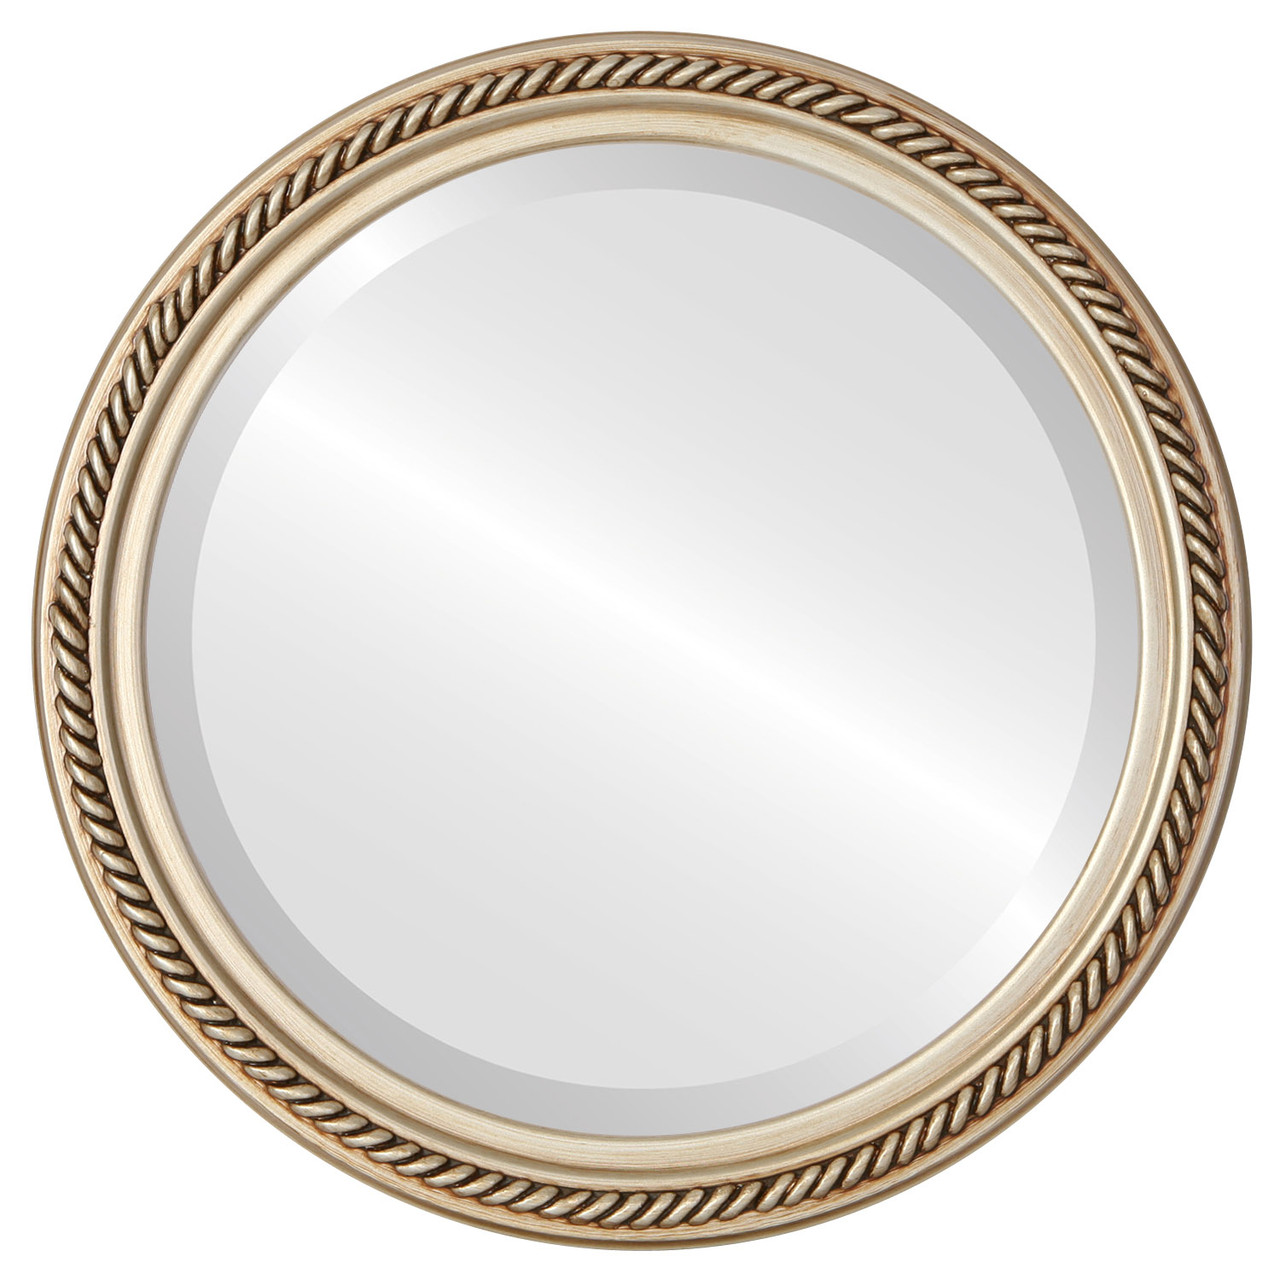 Antique Silver Round Mirrors from $136